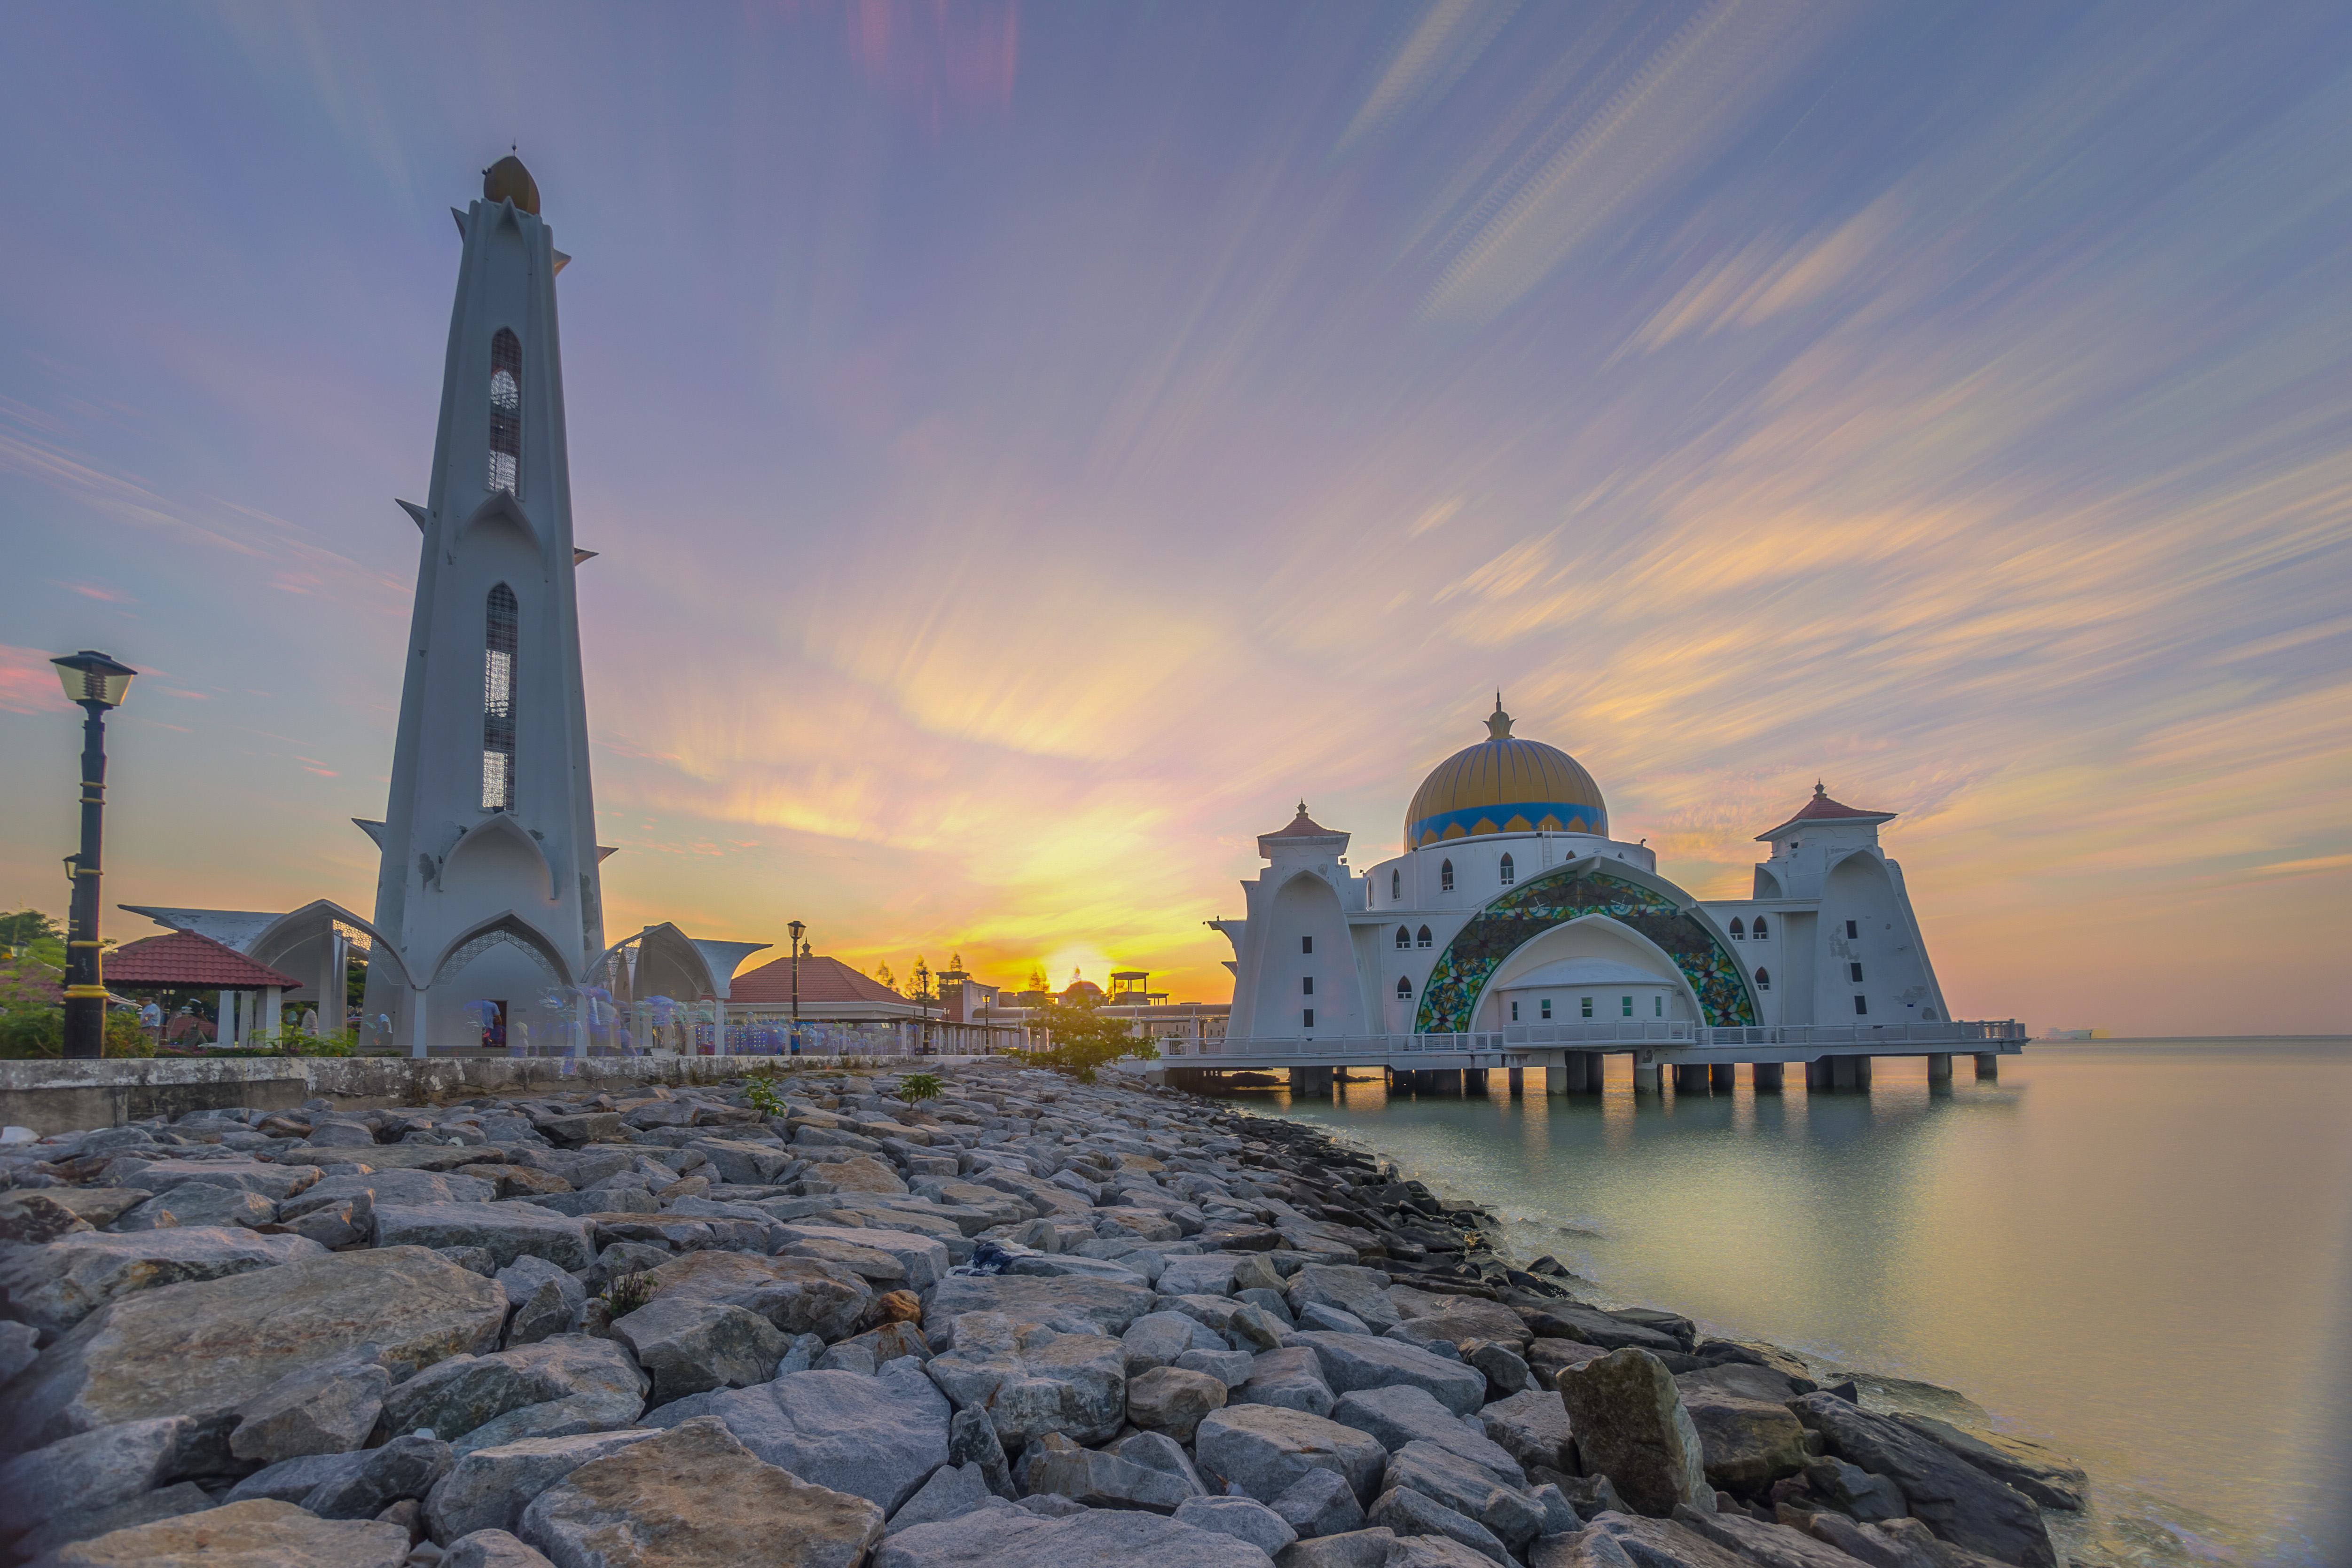 religious, malacca straits mosque, building, coast, malacca, malaysia, mosque, sunset, mosques Desktop home screen Wallpaper